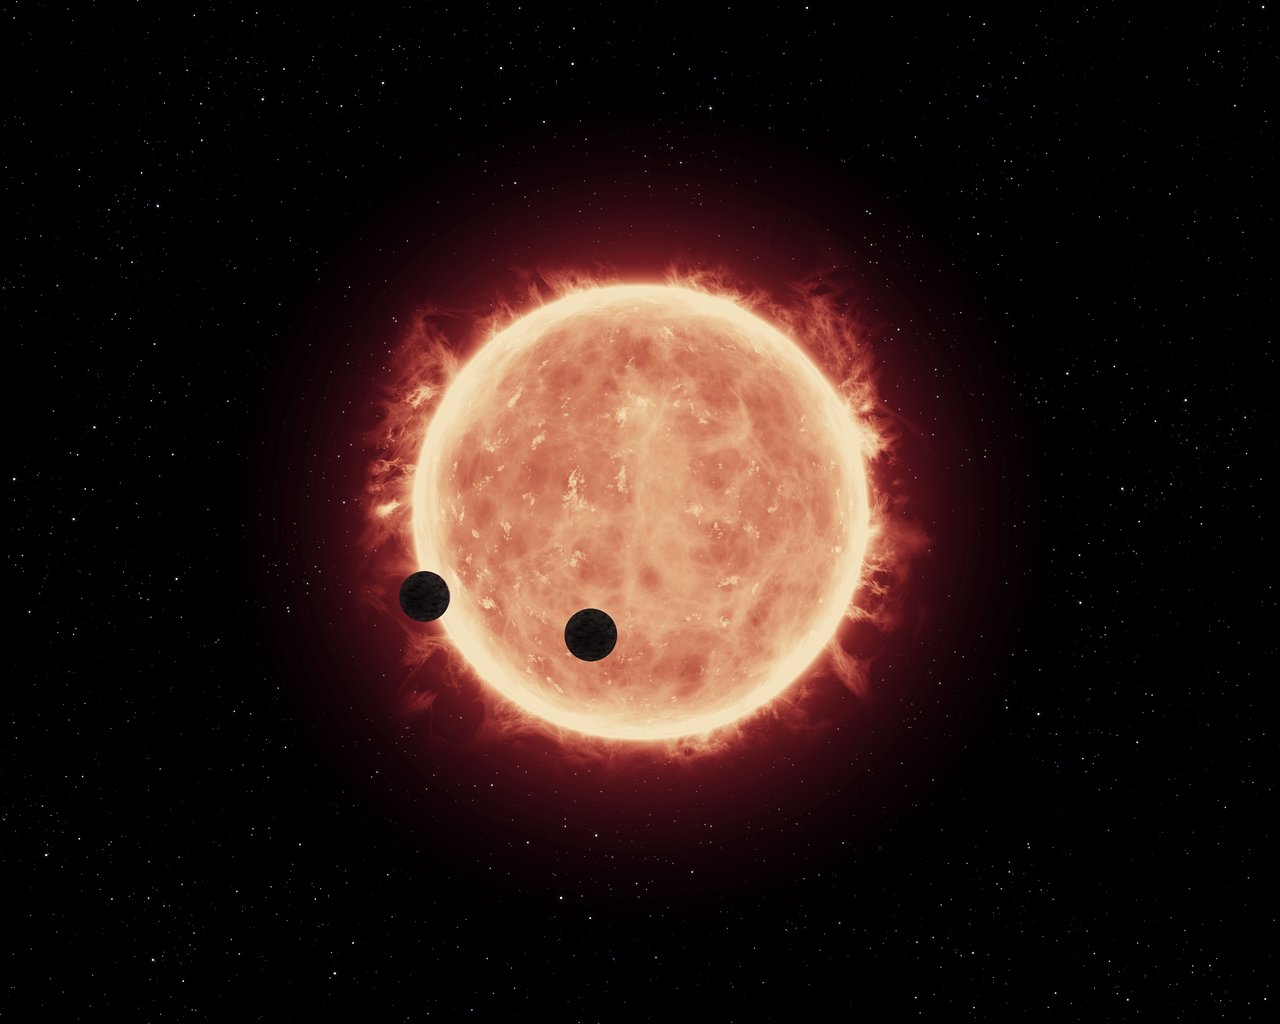 artists_view_of_planets_transiting_red_dwarf_star_in_trappist-1_system